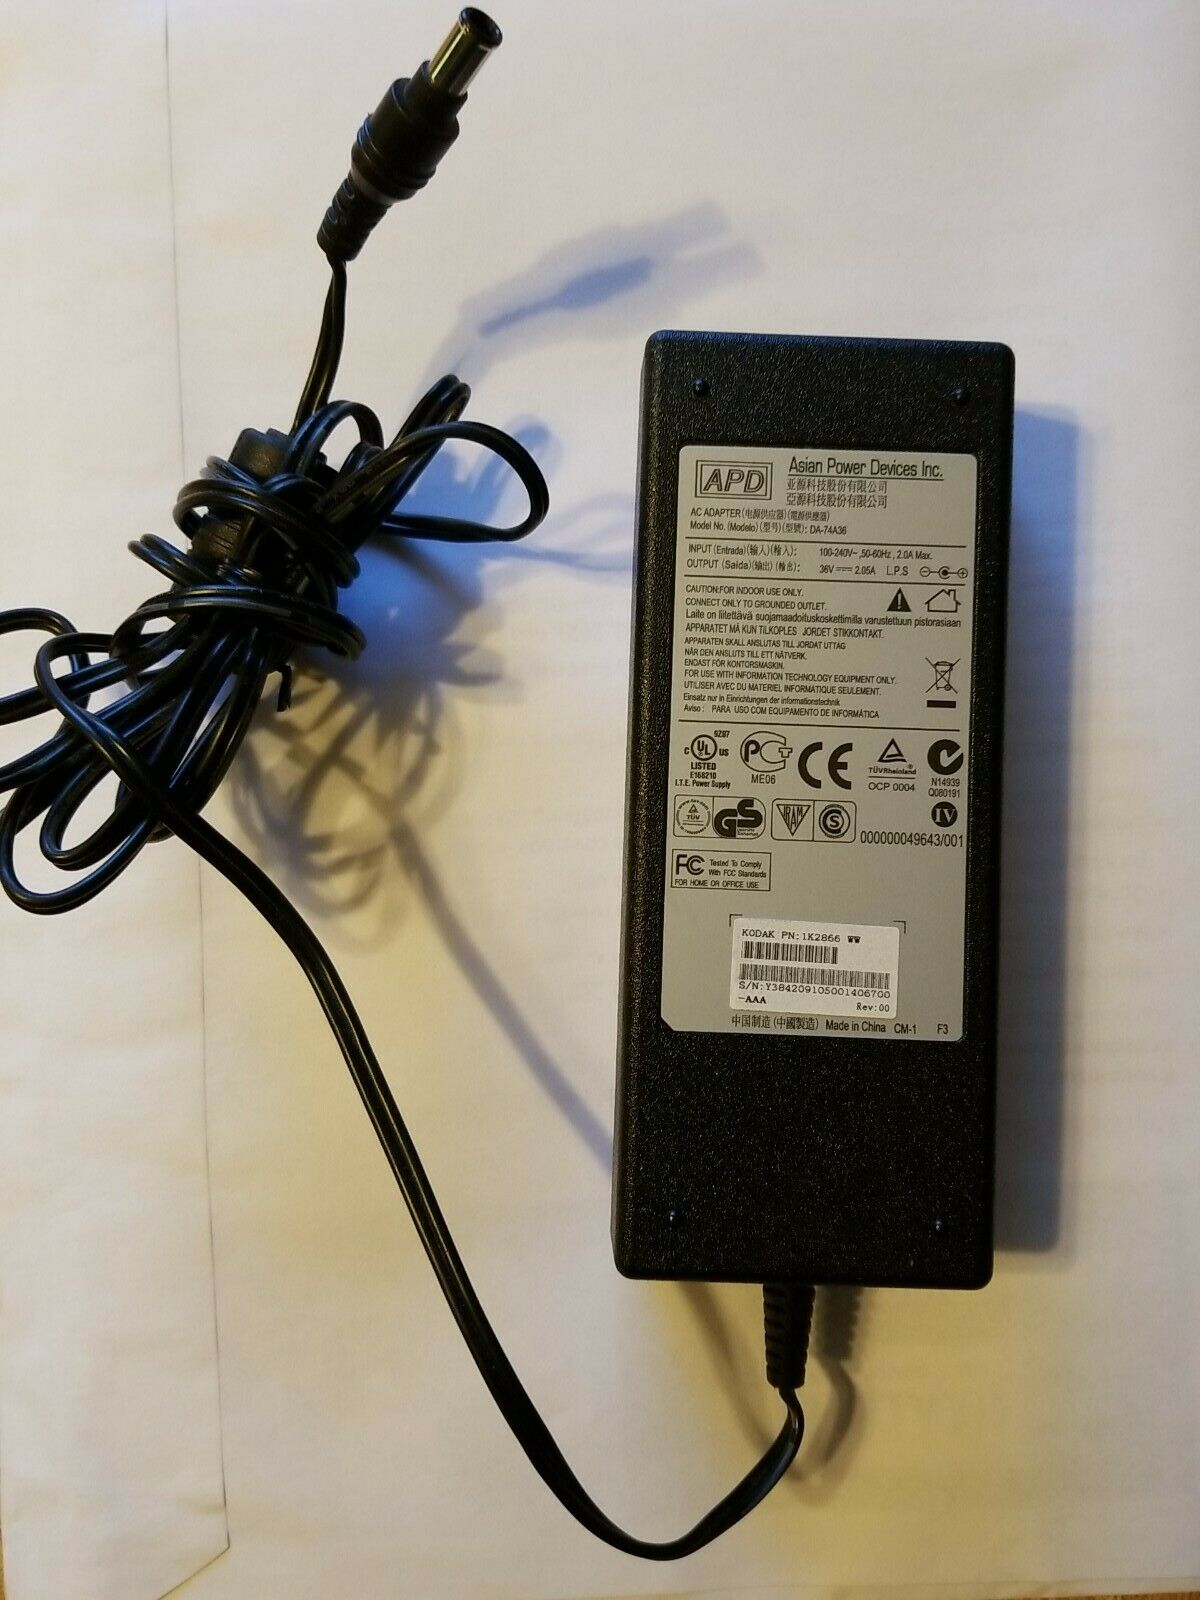 AC Adapter Charger for APD DA-74A36 Asian Power Devices Kodak Printer Supply PSU Brand: Kodak Type: AC/AC Adapter F - Click Image to Close